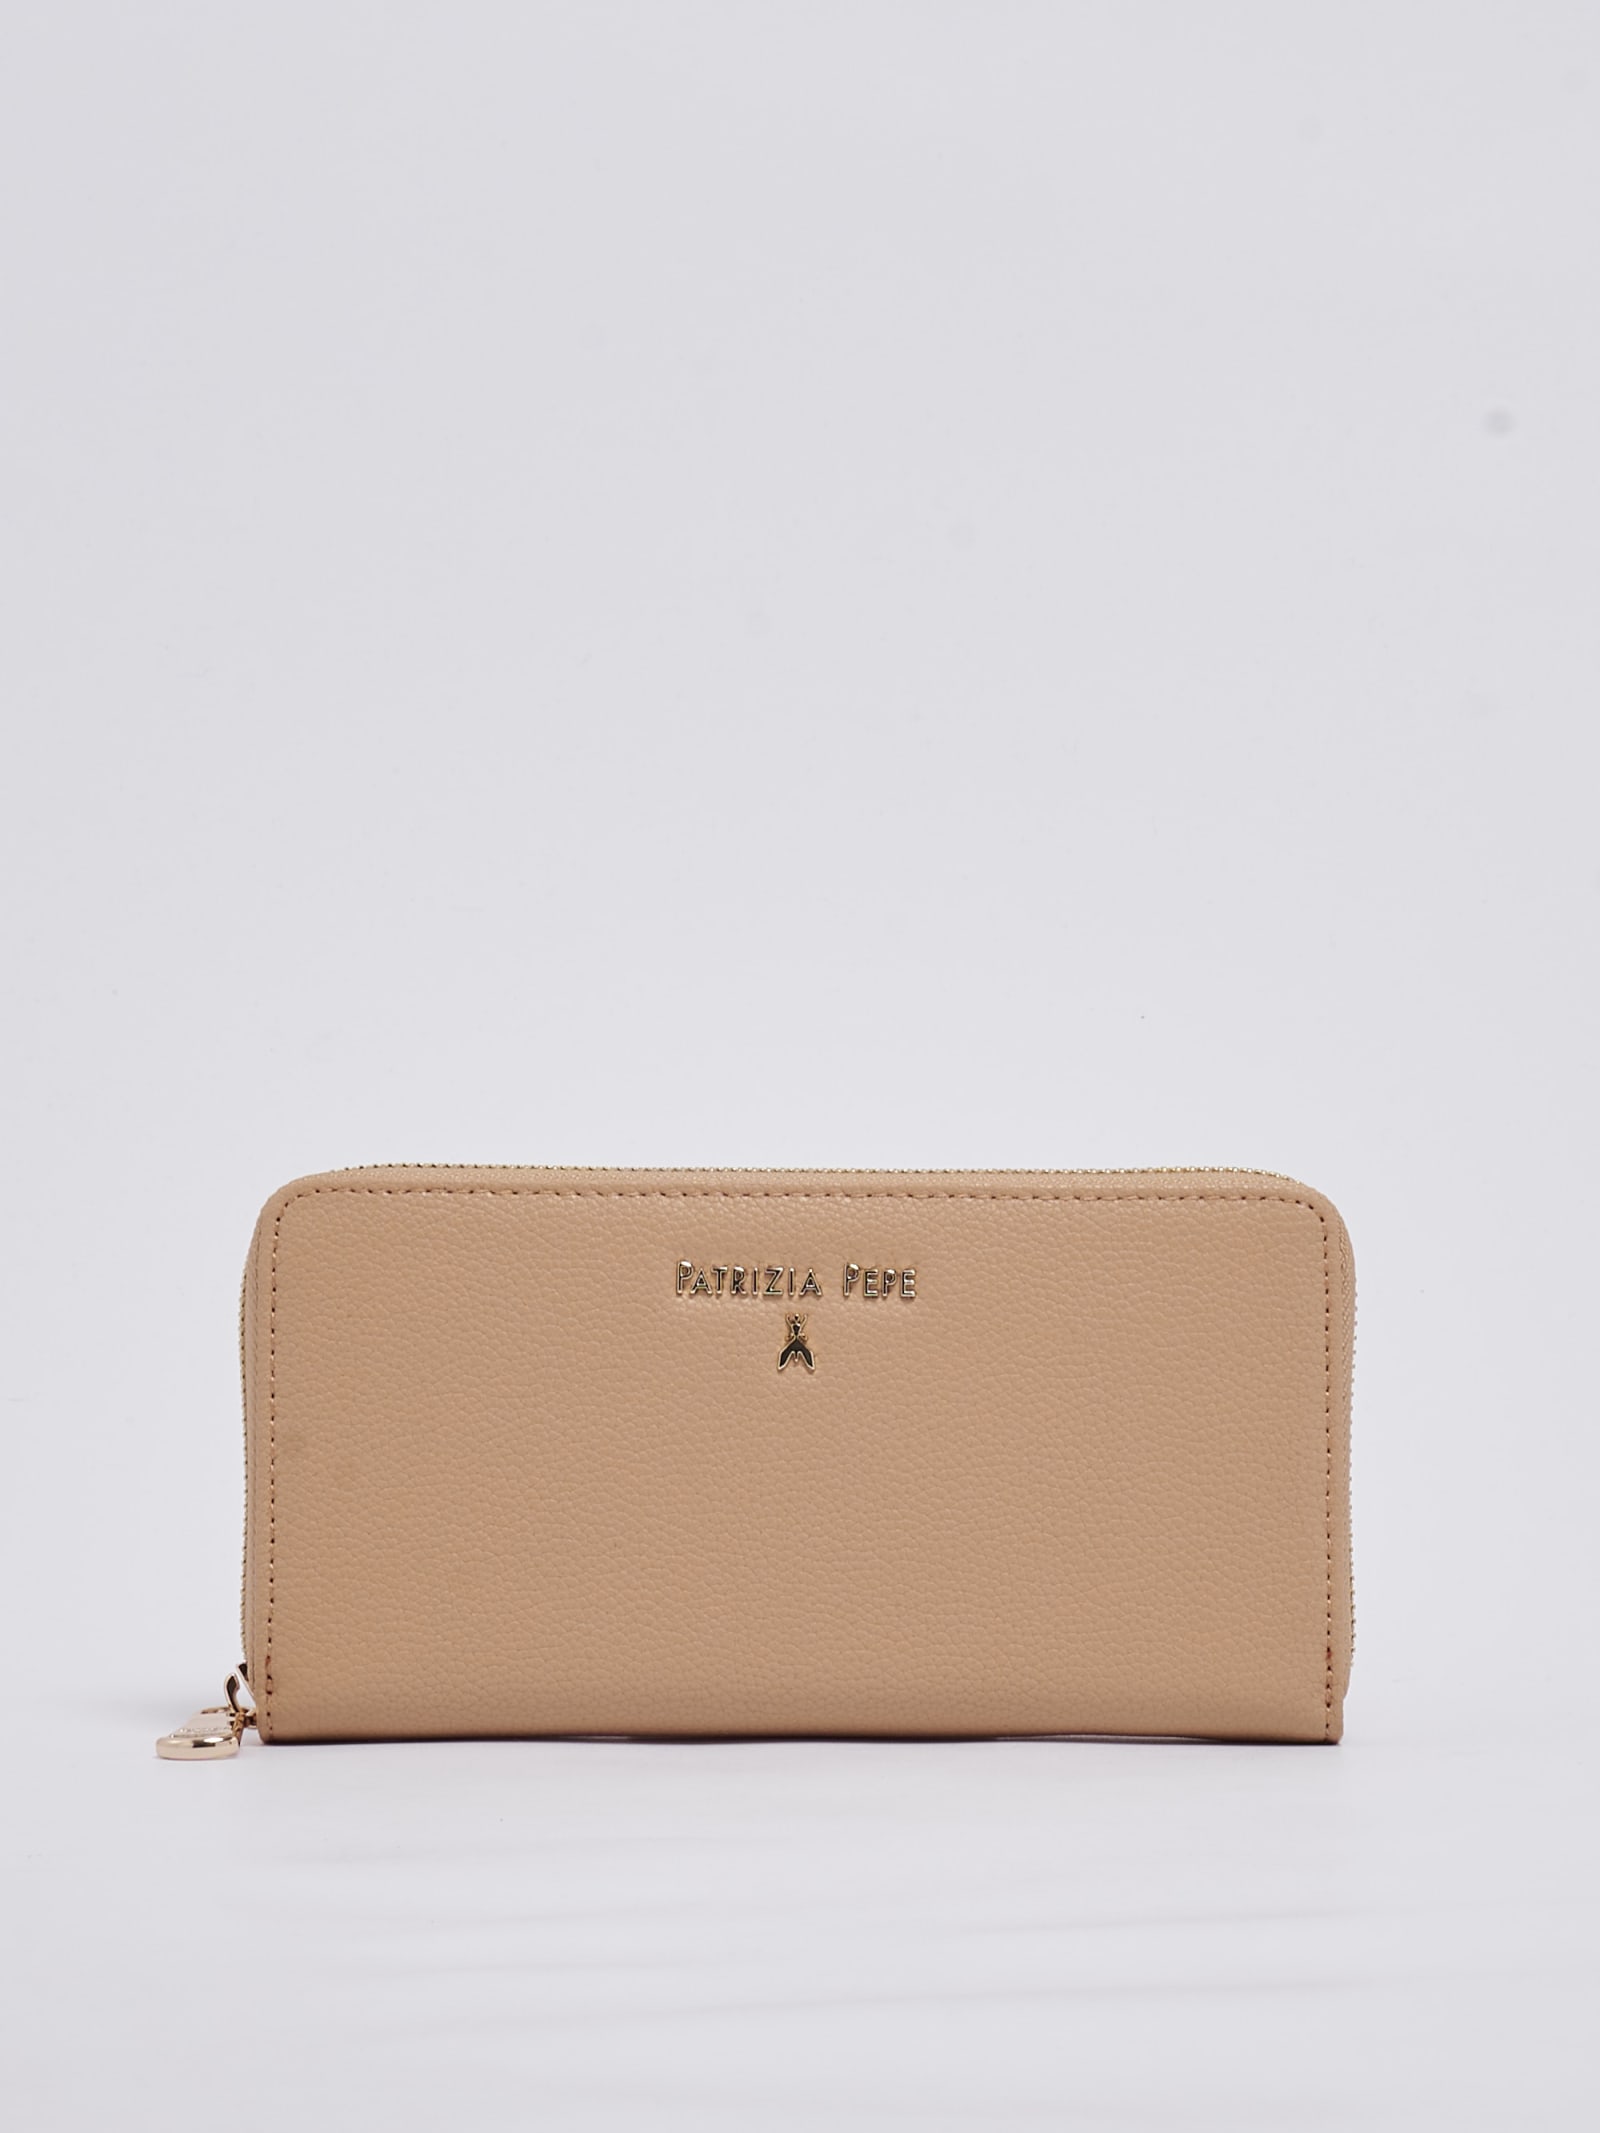 Patrizia Pepe Leather Wallet In Nude